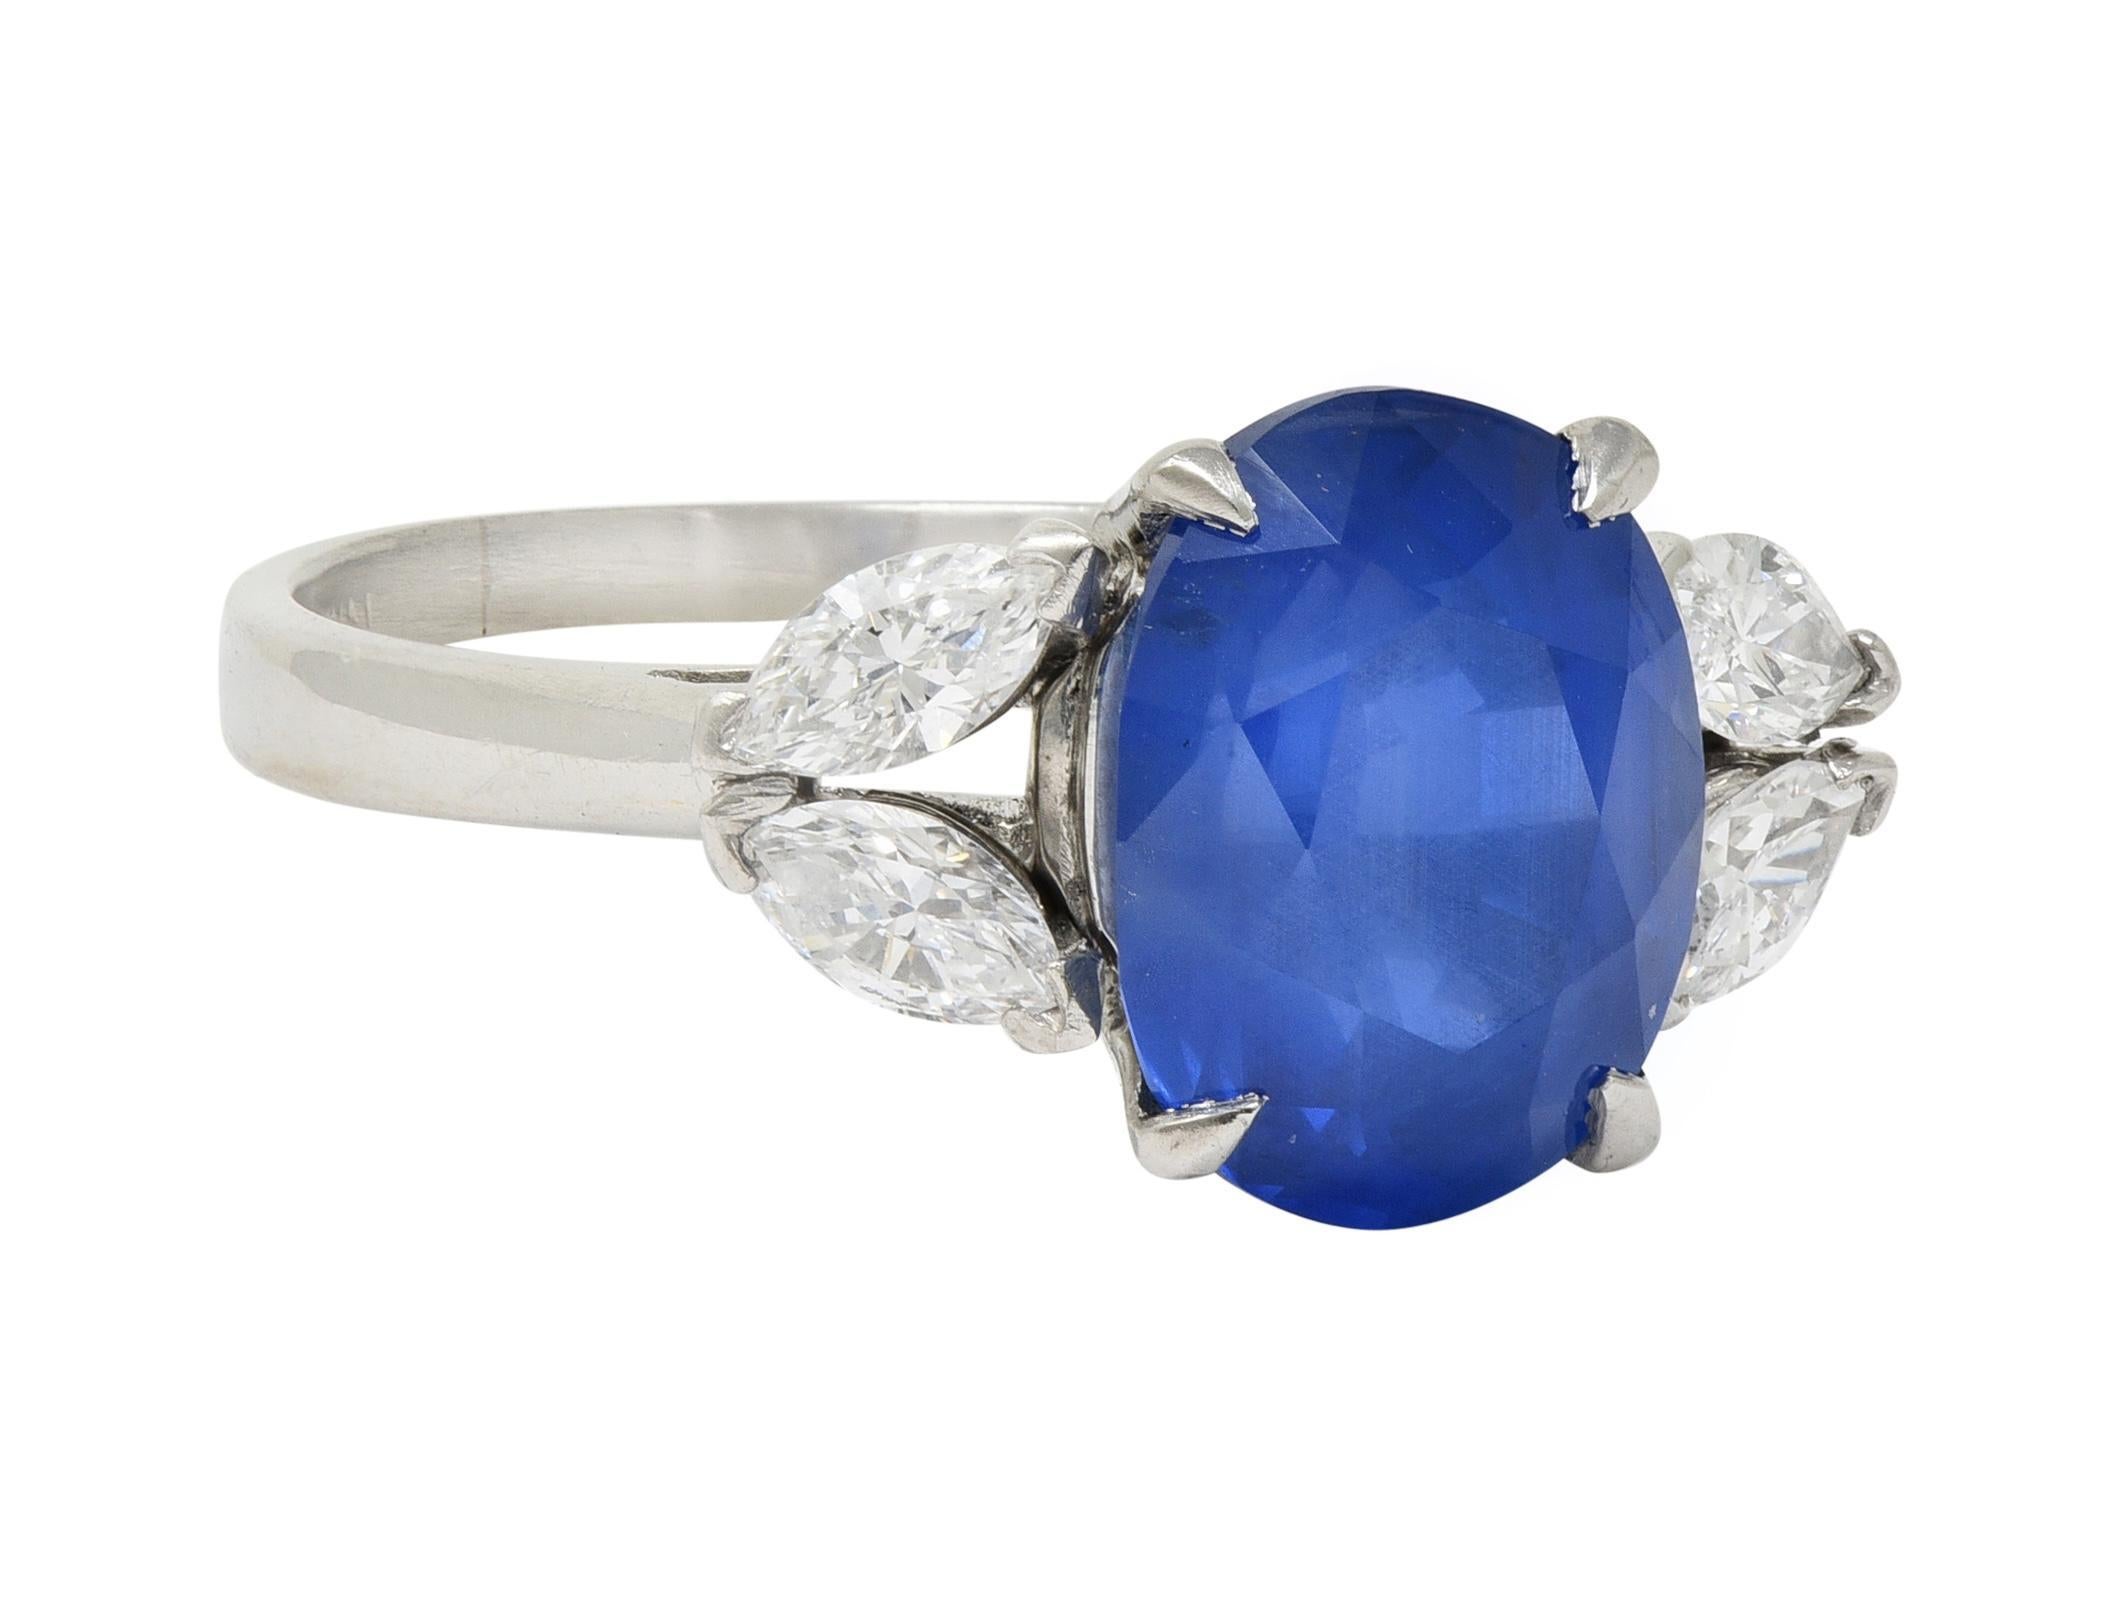 Centering an oval cut sapphire weighing 5.32 carats - transparent light to medium blue in color
Natural Burmese in origin with no indications of heat treatment - prong set in basket
Flanked by marquise cut diamonds clustered at cathedral